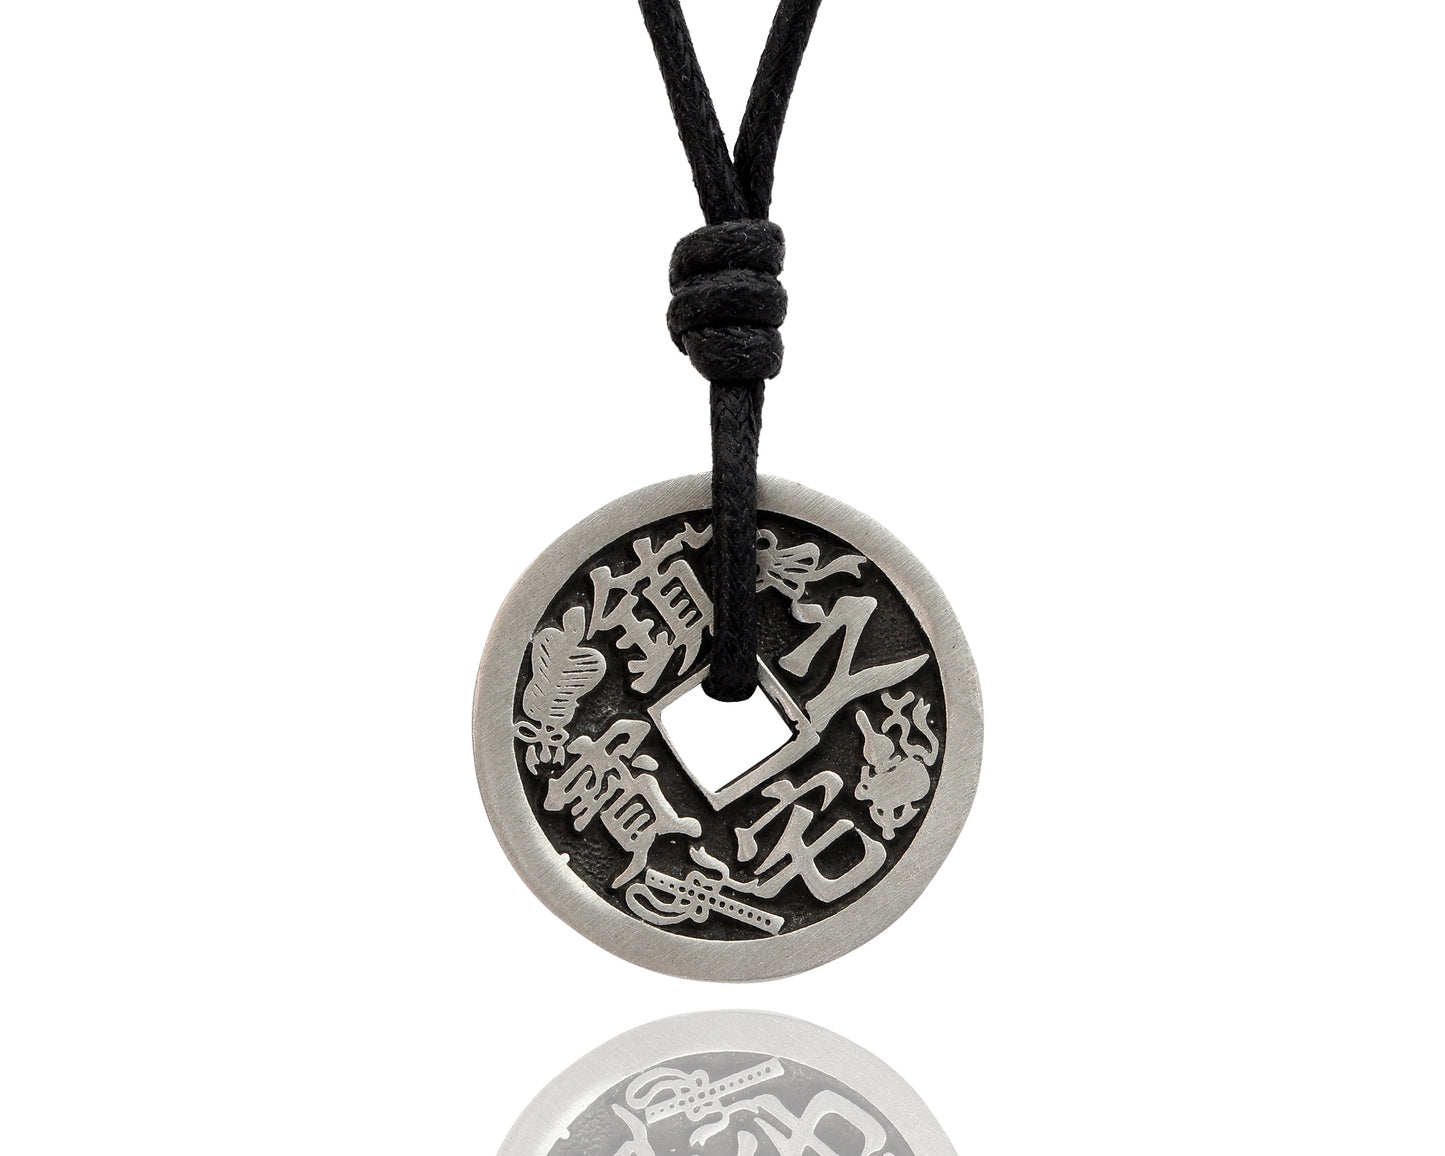 New Chinese Zodiac I-ching Silver Pewter Charm Necklace Pendant Jewelry